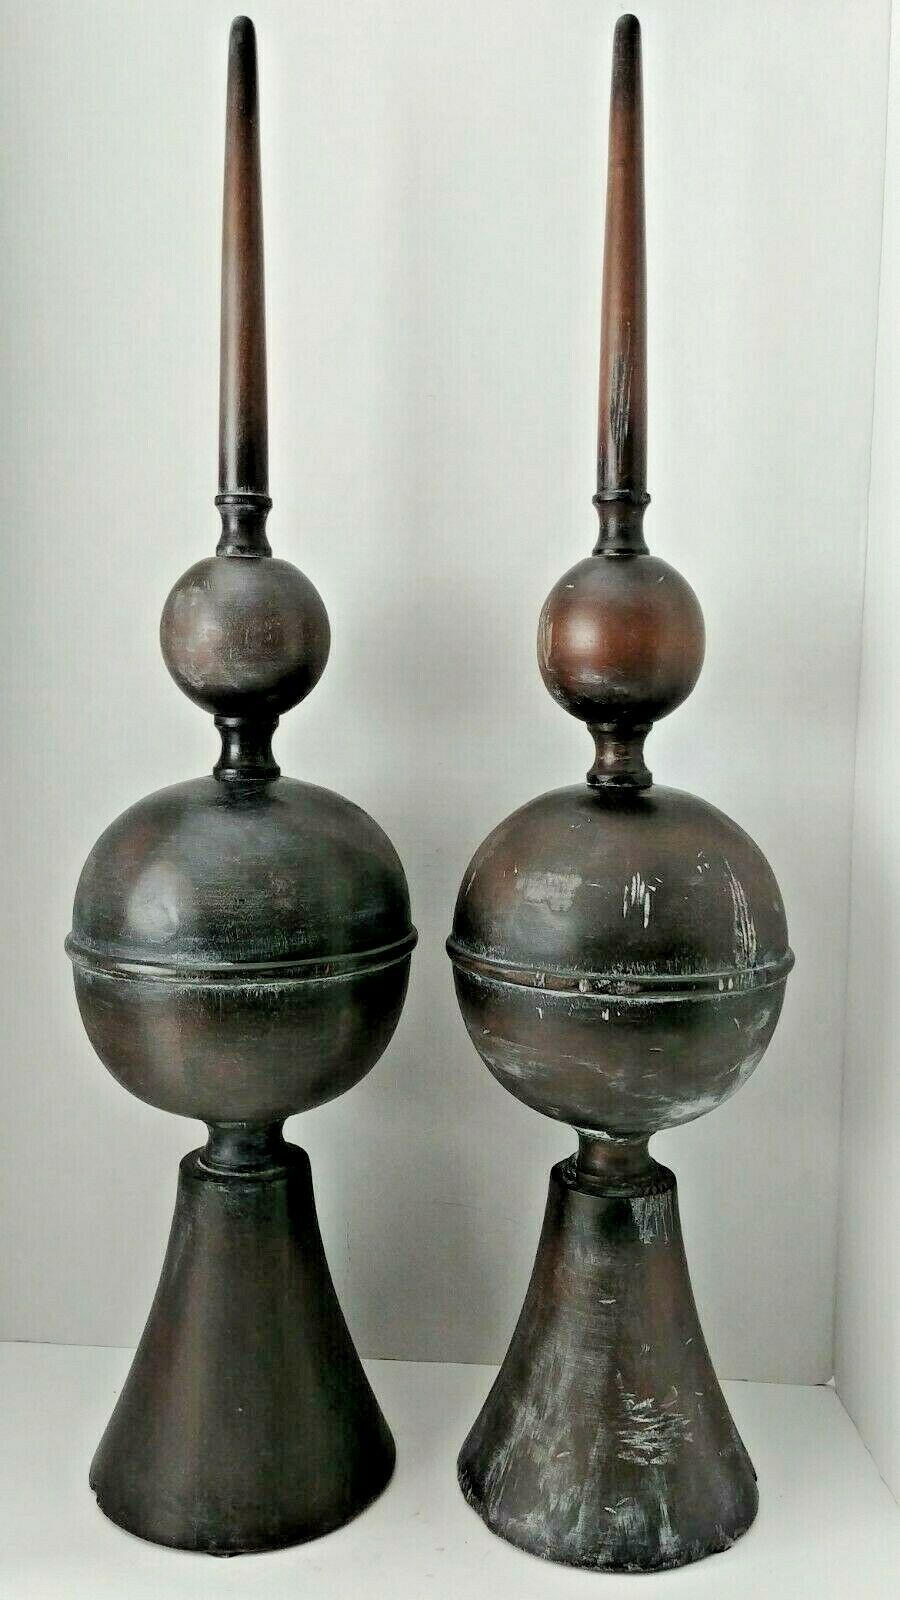 Pair Interior Architectural Finials Decorative Spiked Carved Wood Distressed 34"